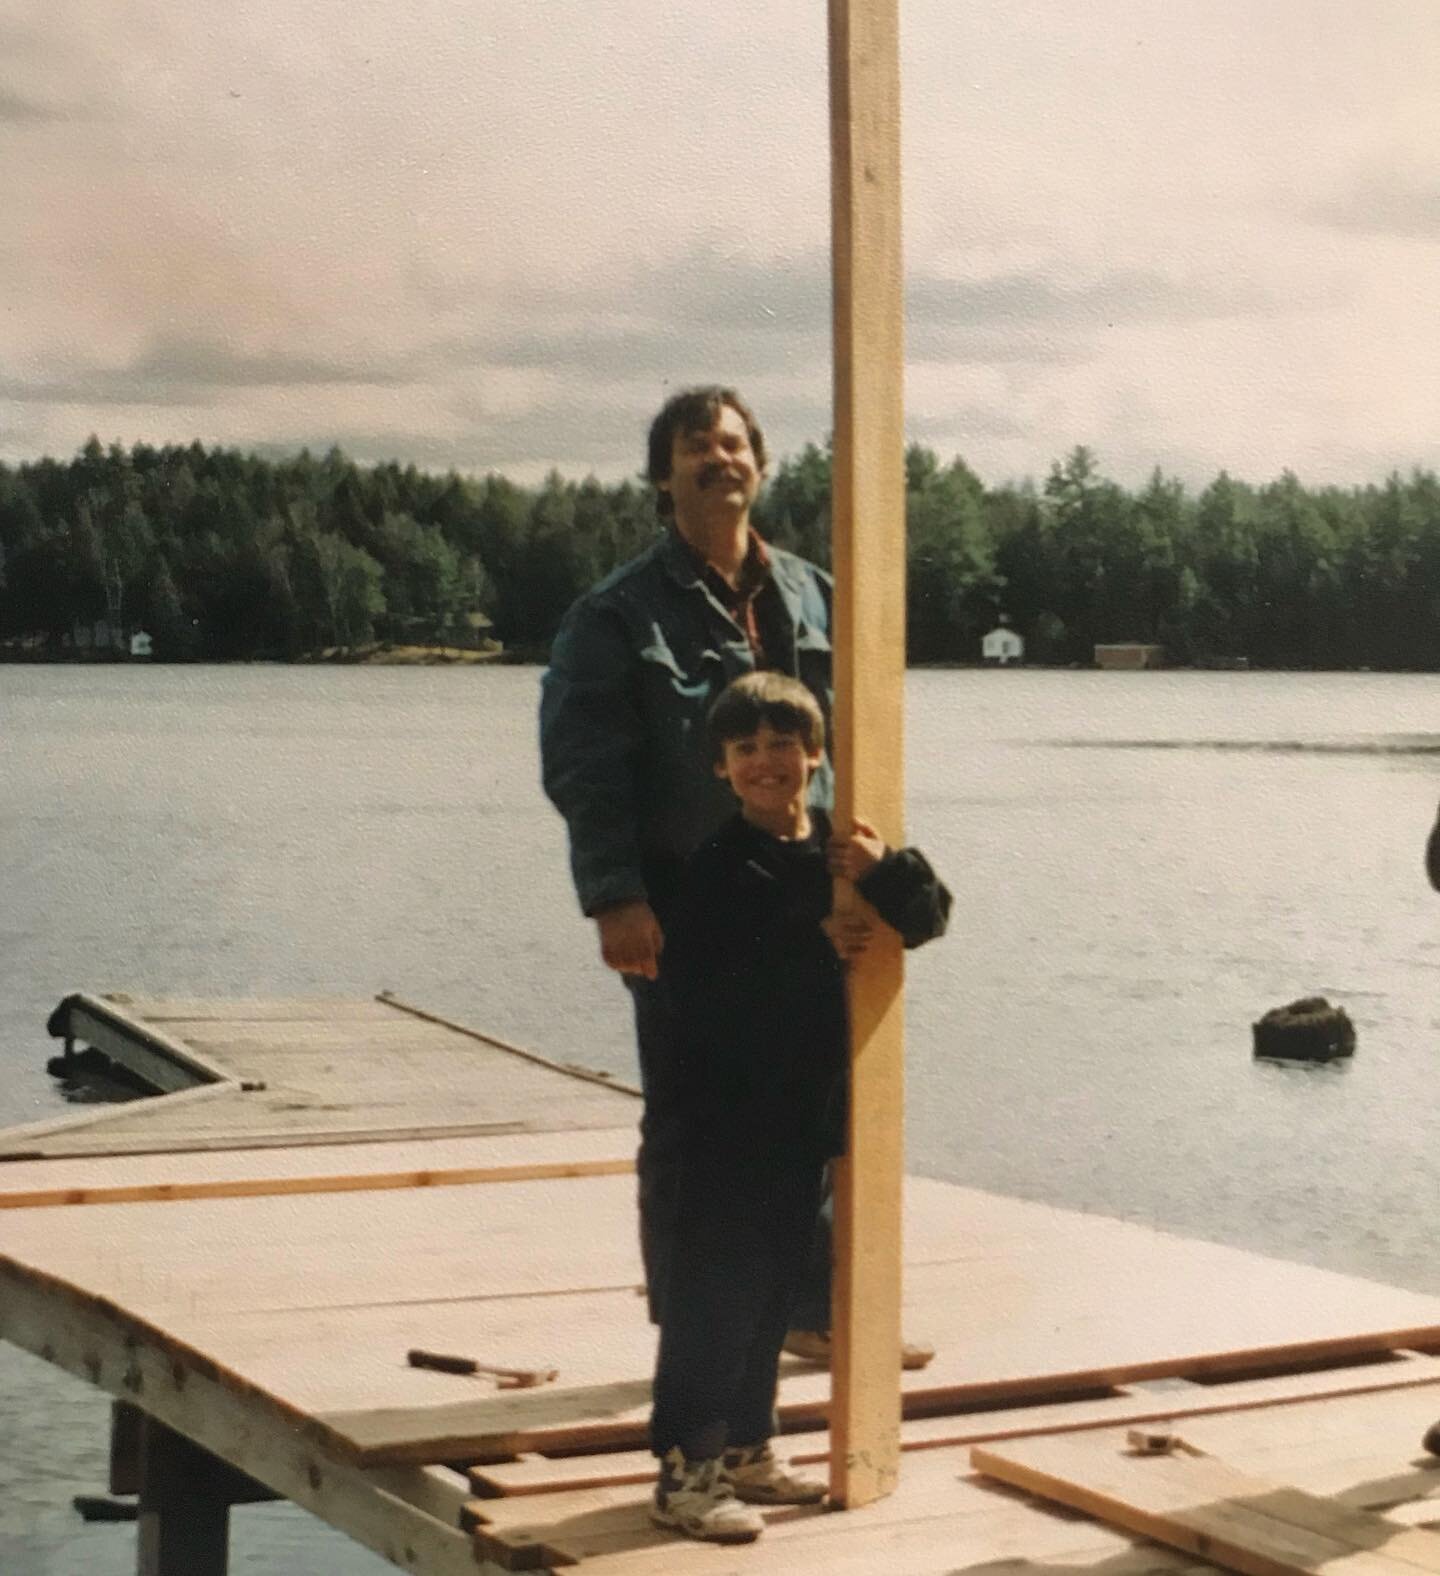 Proof that @northcountrydocks owner has been doing this a long time, here he is building his first dock with his dad on #catchacomalake in the 90s. Thirty years of experience lets you know your dock is in safe hands with us! #theygrowuptoofast #dock 